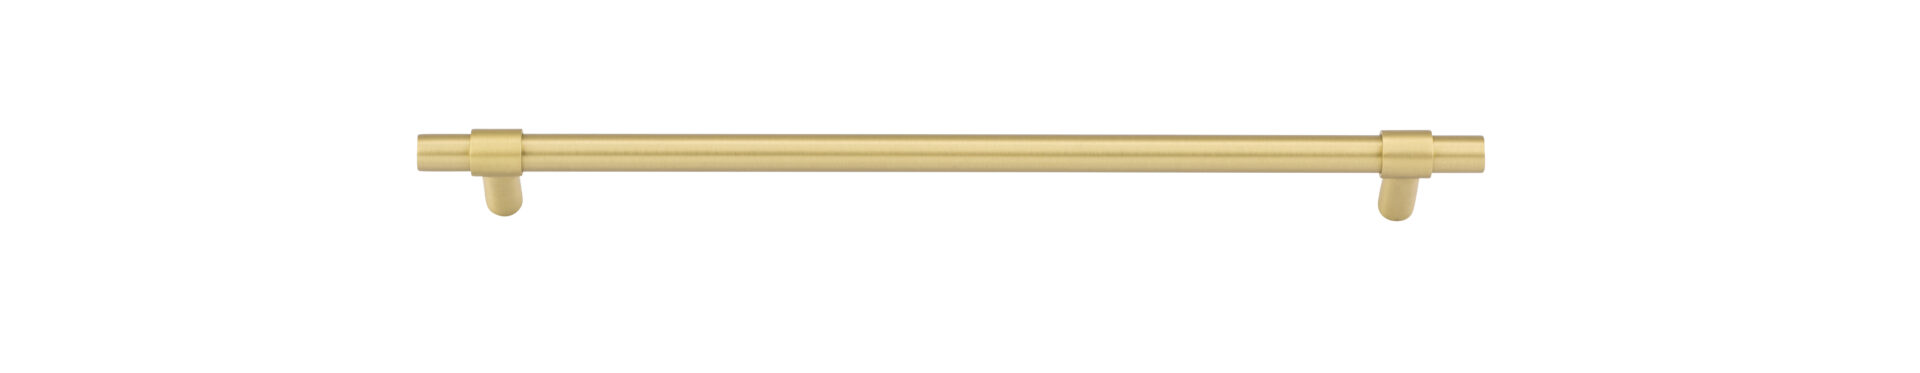 17154 - Helsinki Cabinet Pull - CTC256mm - Brushed Gold PVD